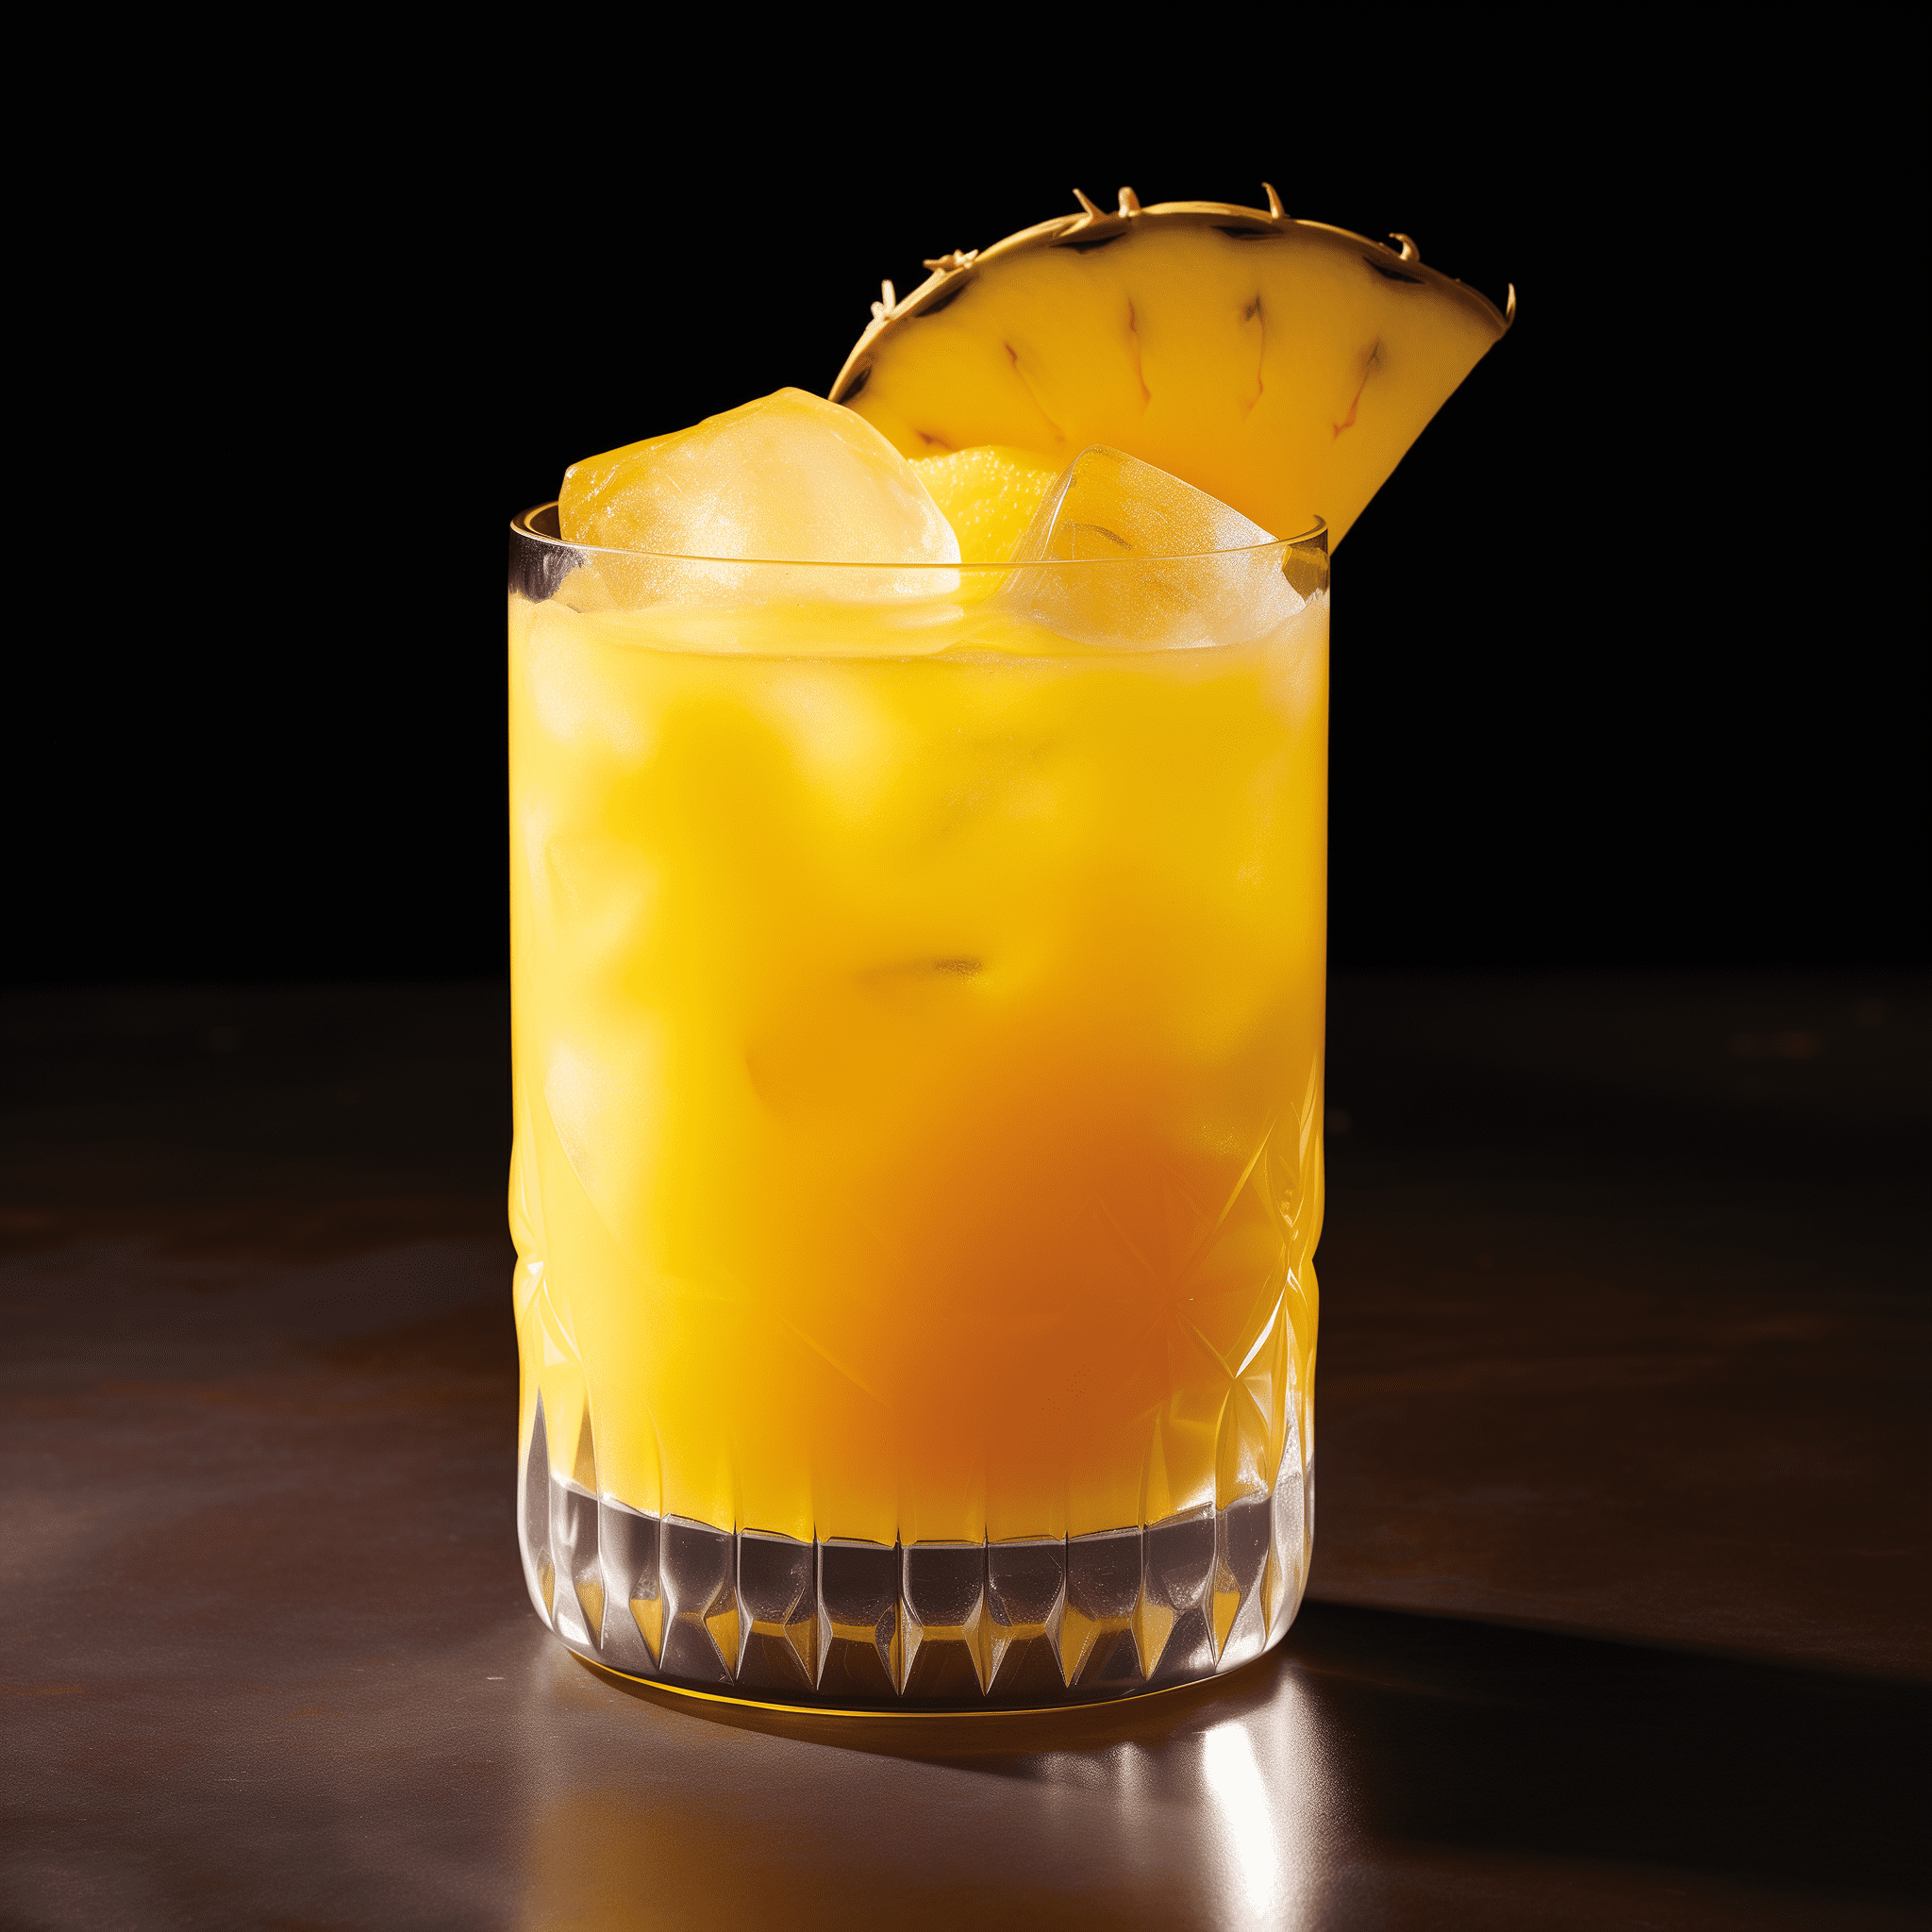 Mango Baby Cocktail Recipe - The Mango Baby cocktail is a delightful blend of sweet and tangy flavors with a subtle fizzy kick from the soda water. The mango liqueur and syrup provide a rich, fruity sweetness, while the vodka adds a smooth, clean bite that balances the drink. It's a light and refreshing cocktail with a tropical twist that's perfect for sipping on a warm day.